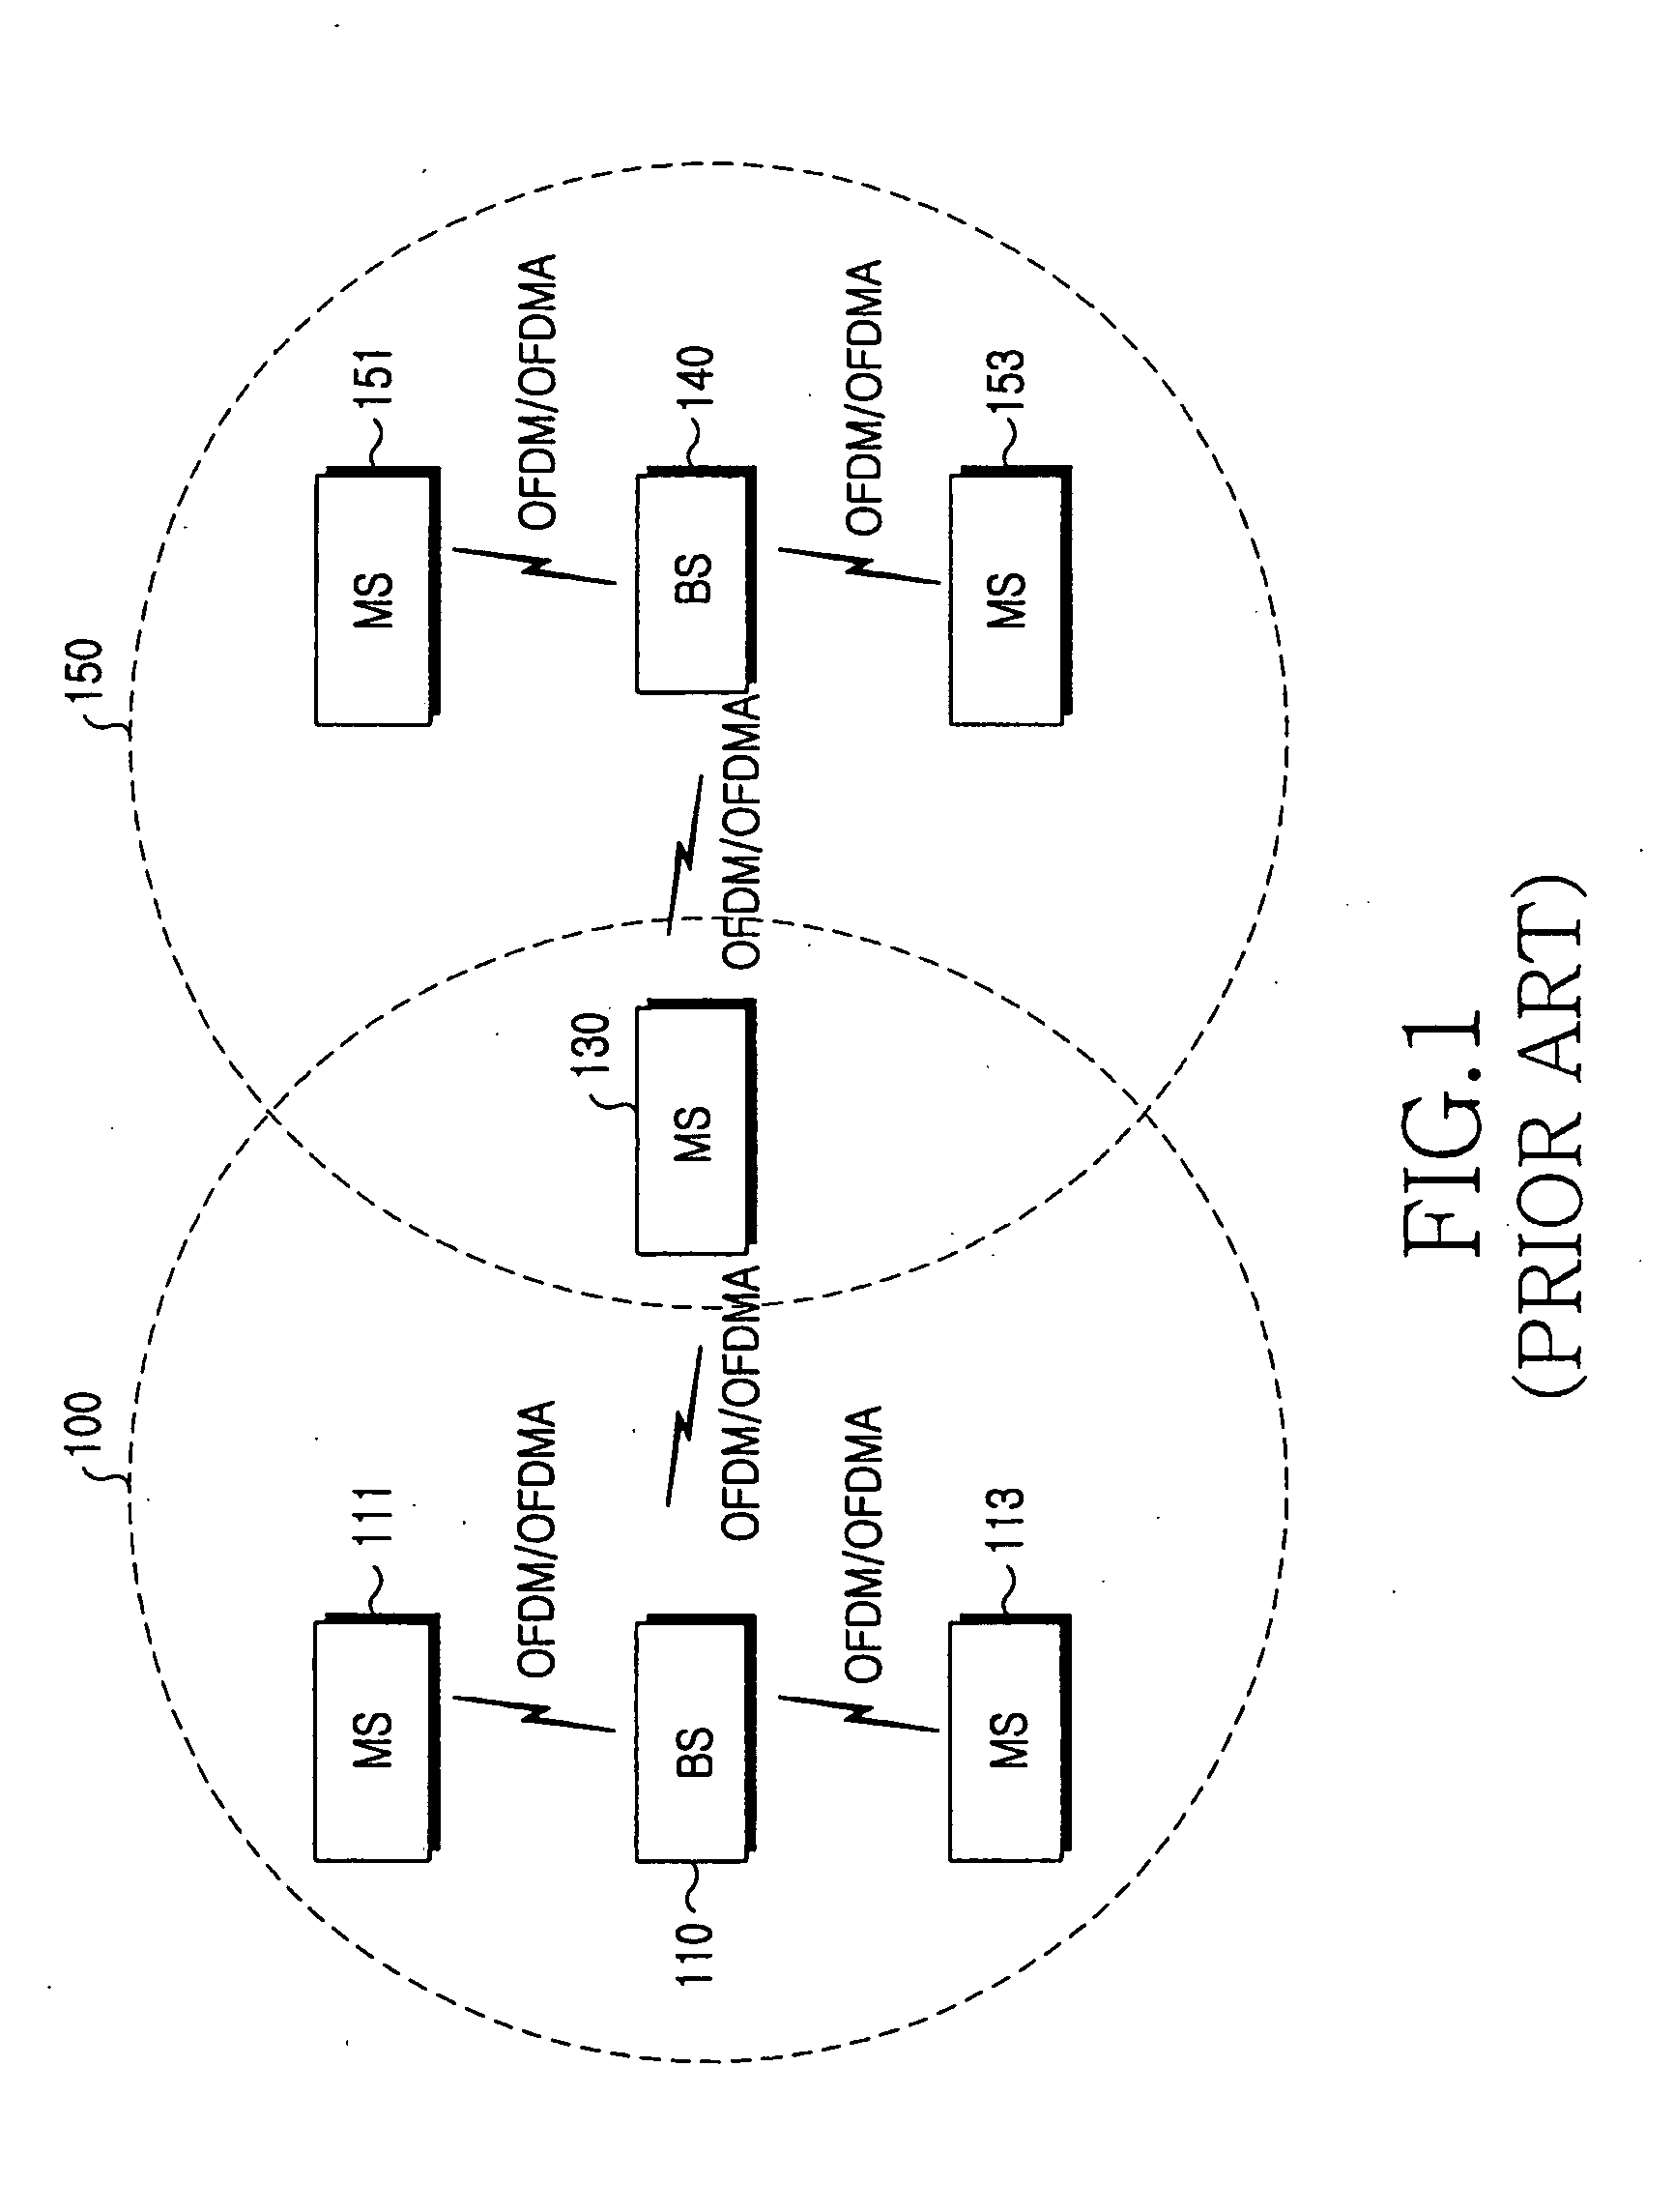 System and method for performing handover between frequency assignments in a communication system